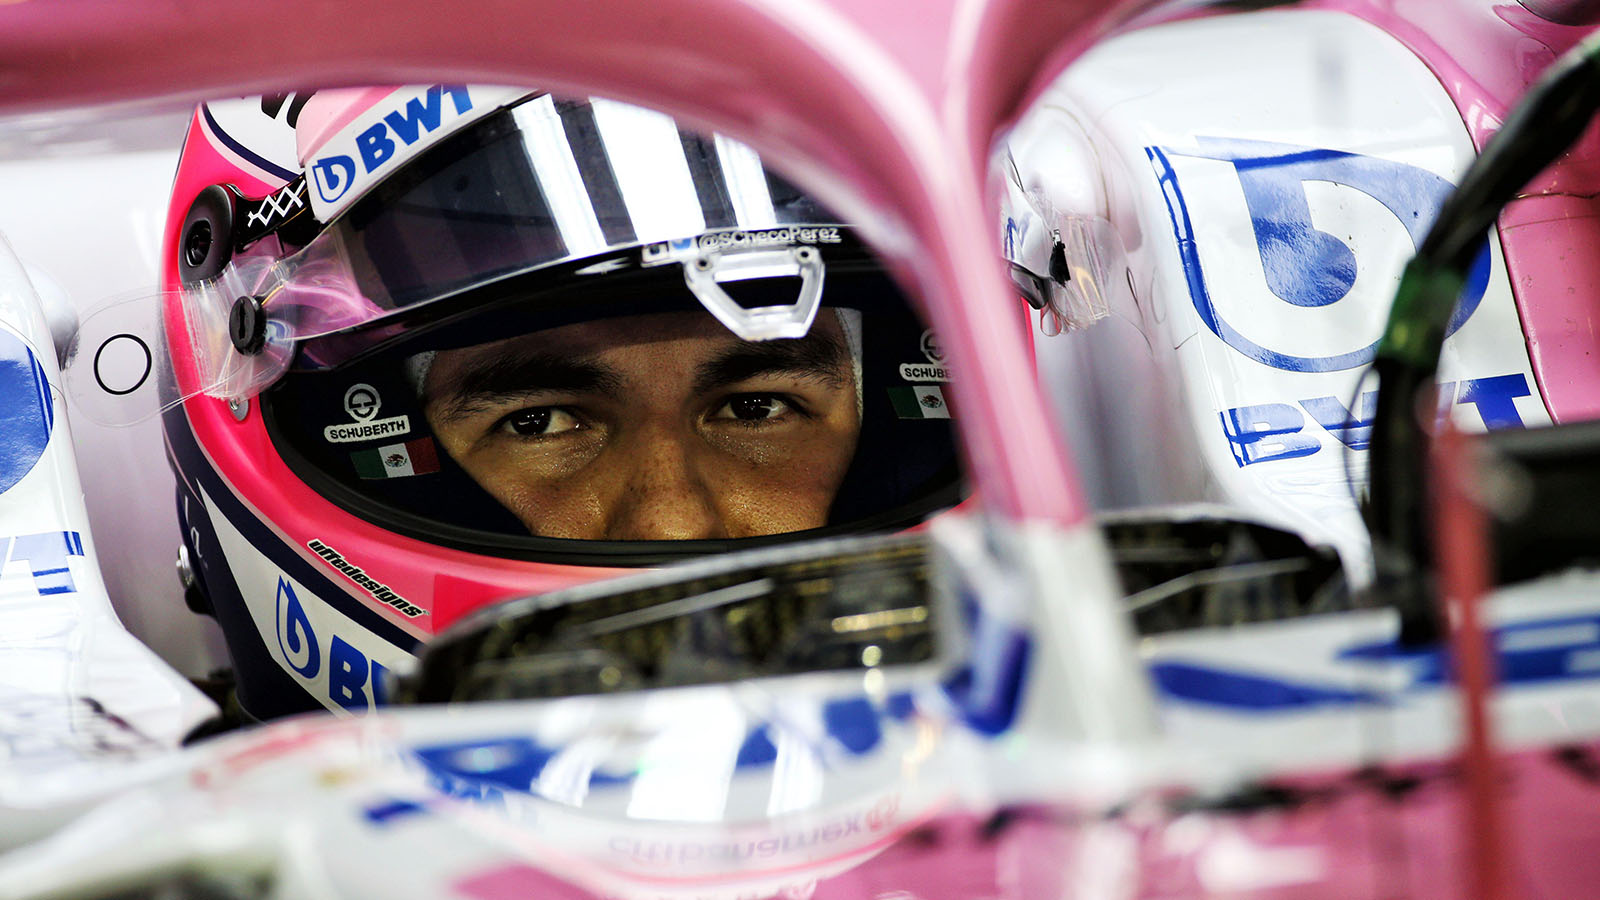 Sergio Perez watches on from the cockpit during practice at the Abu Dhabi Grand Prix